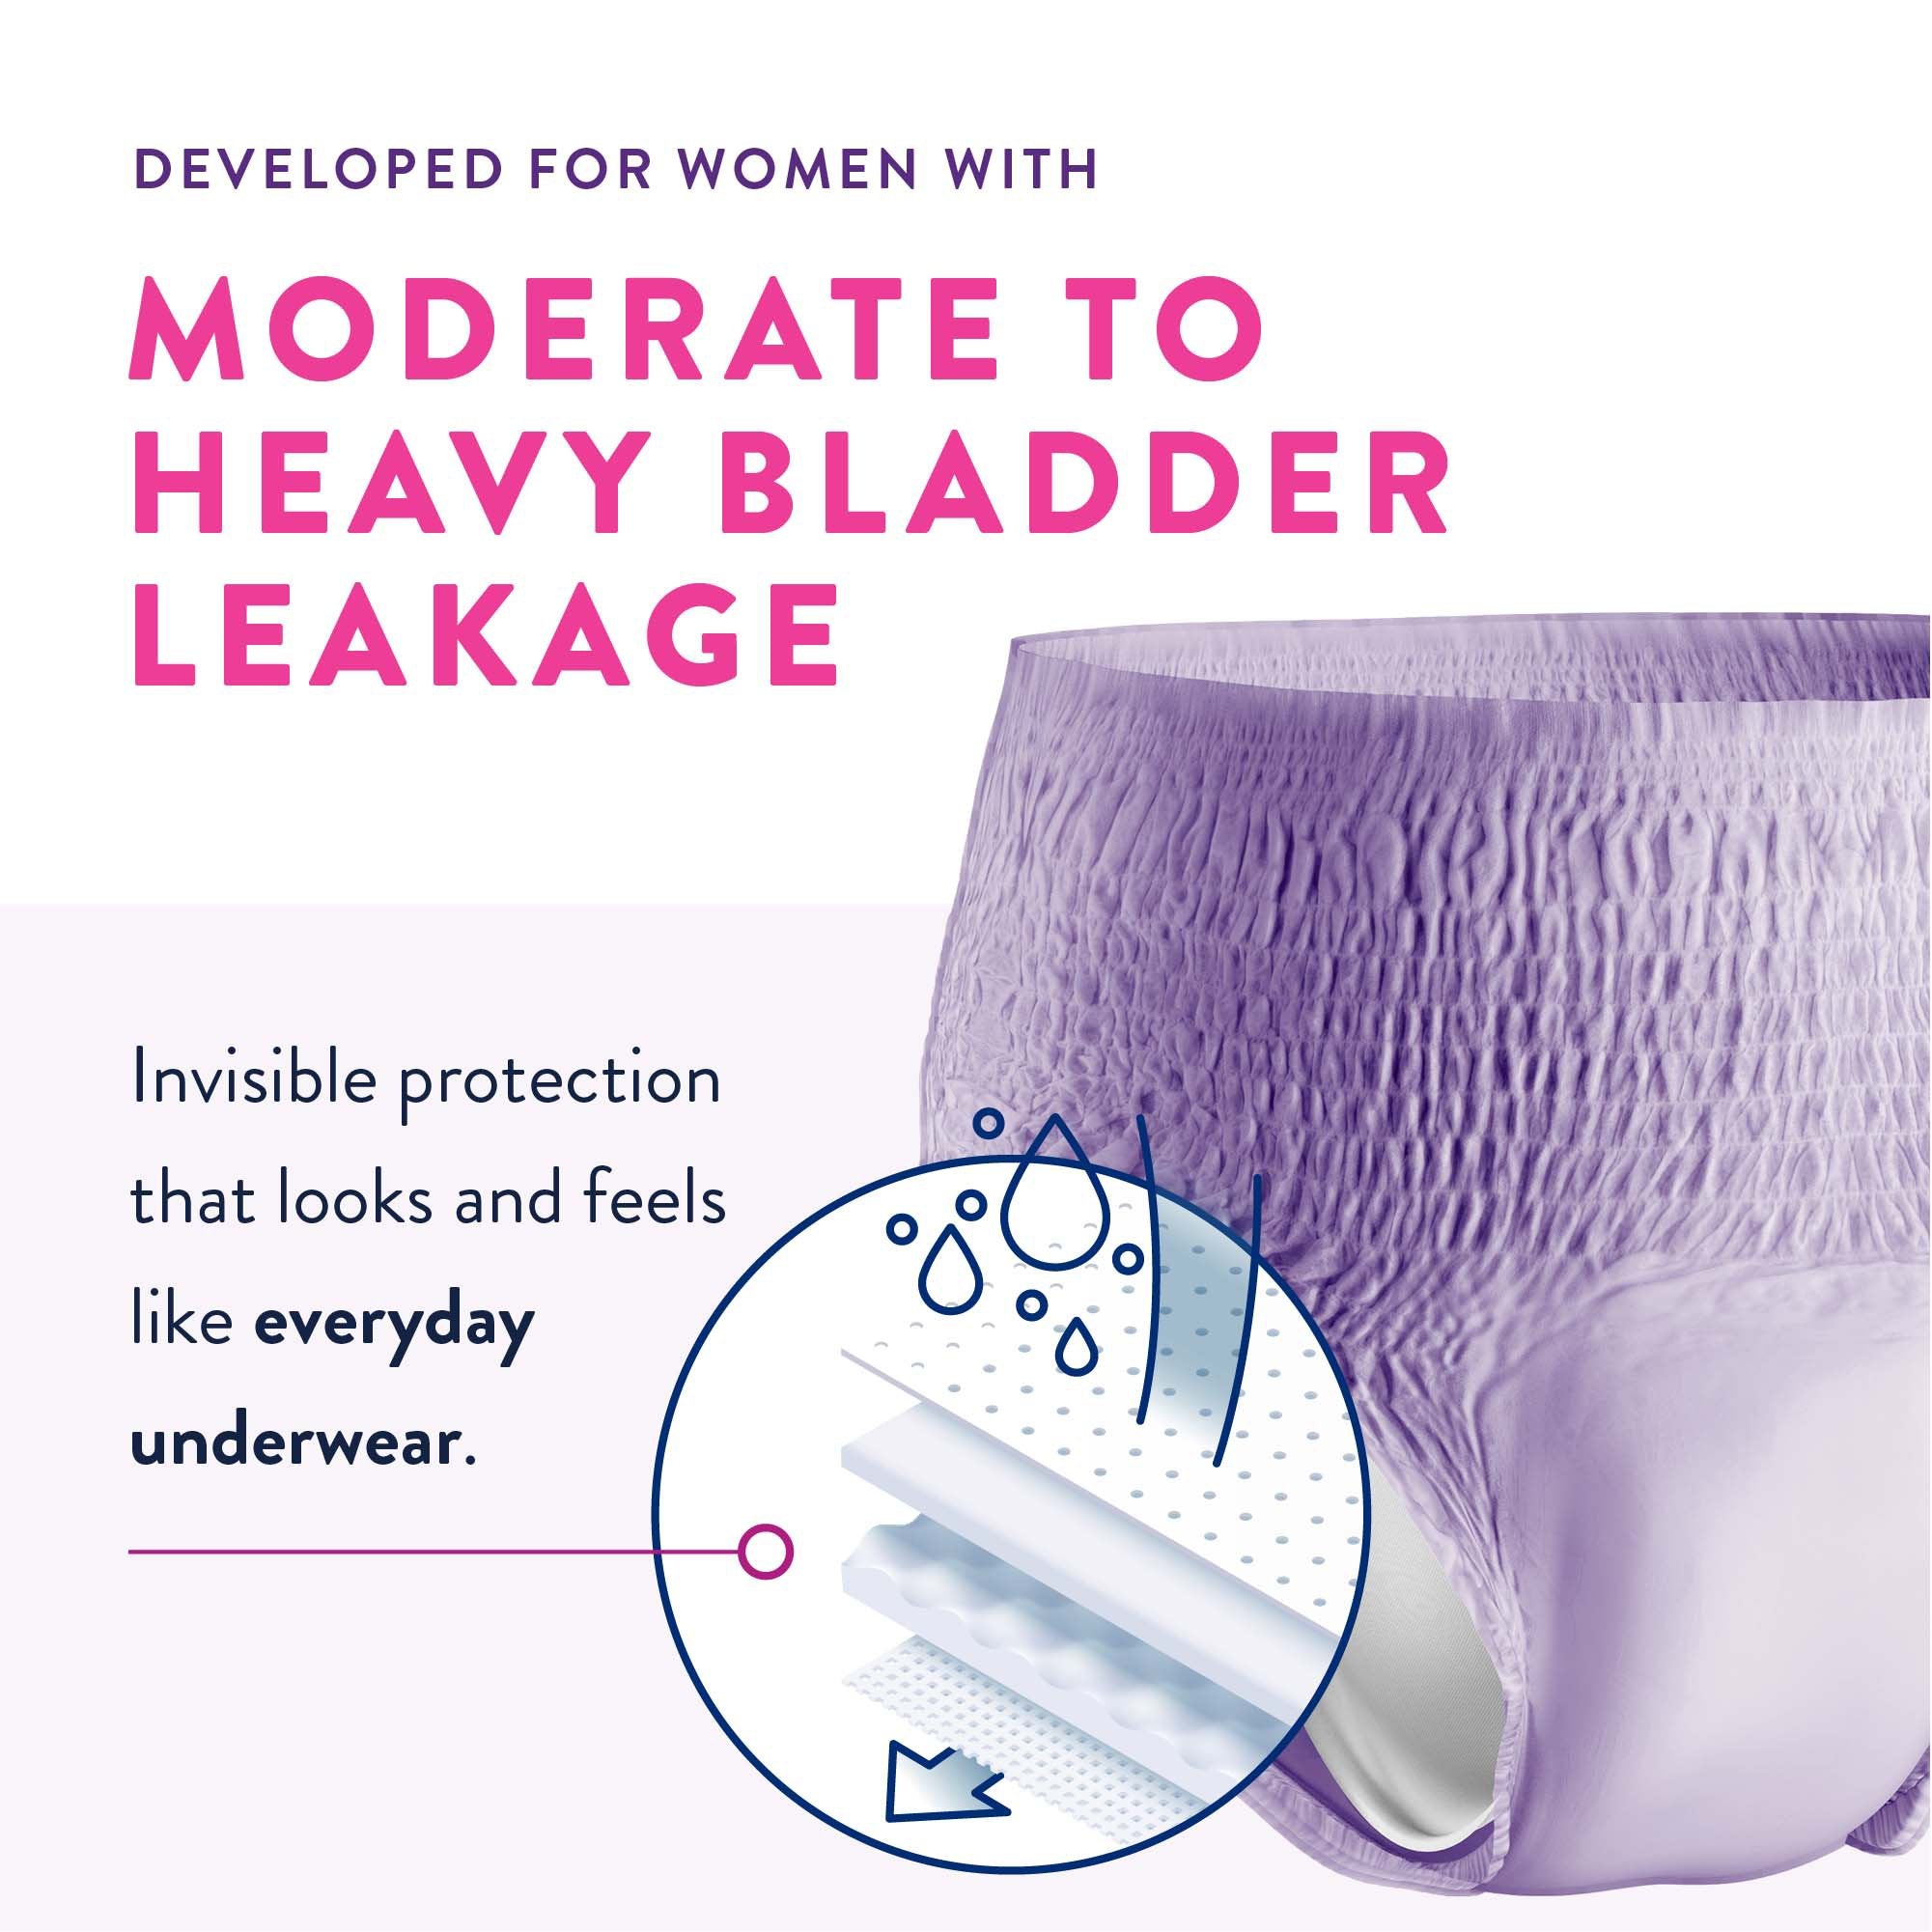 Female Adult Absorbent Underwear Prevail Daily Underwear Pull On with Tear Away Seams Small Disposable Heavy Absorbency